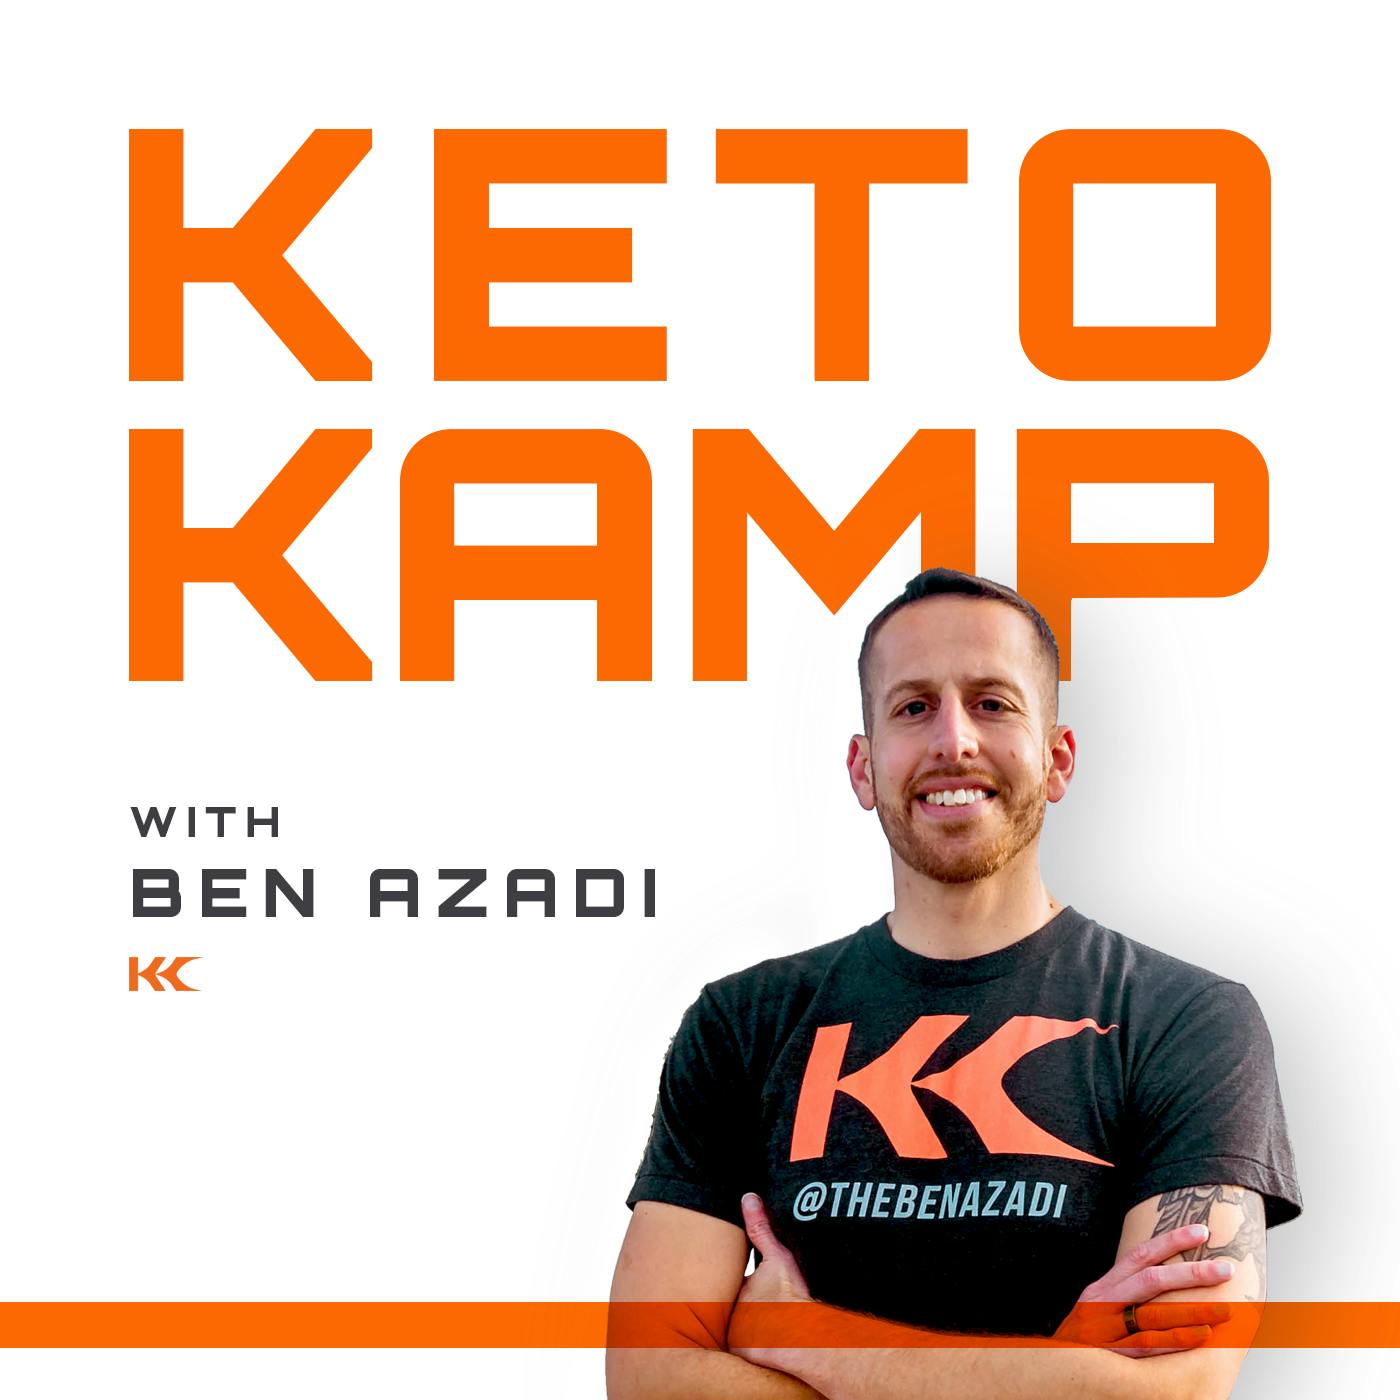 Ben Greenfield | Strategies For Lowering Blood Sugars, Keto Flexing, Living Authentically & More! KKP 202